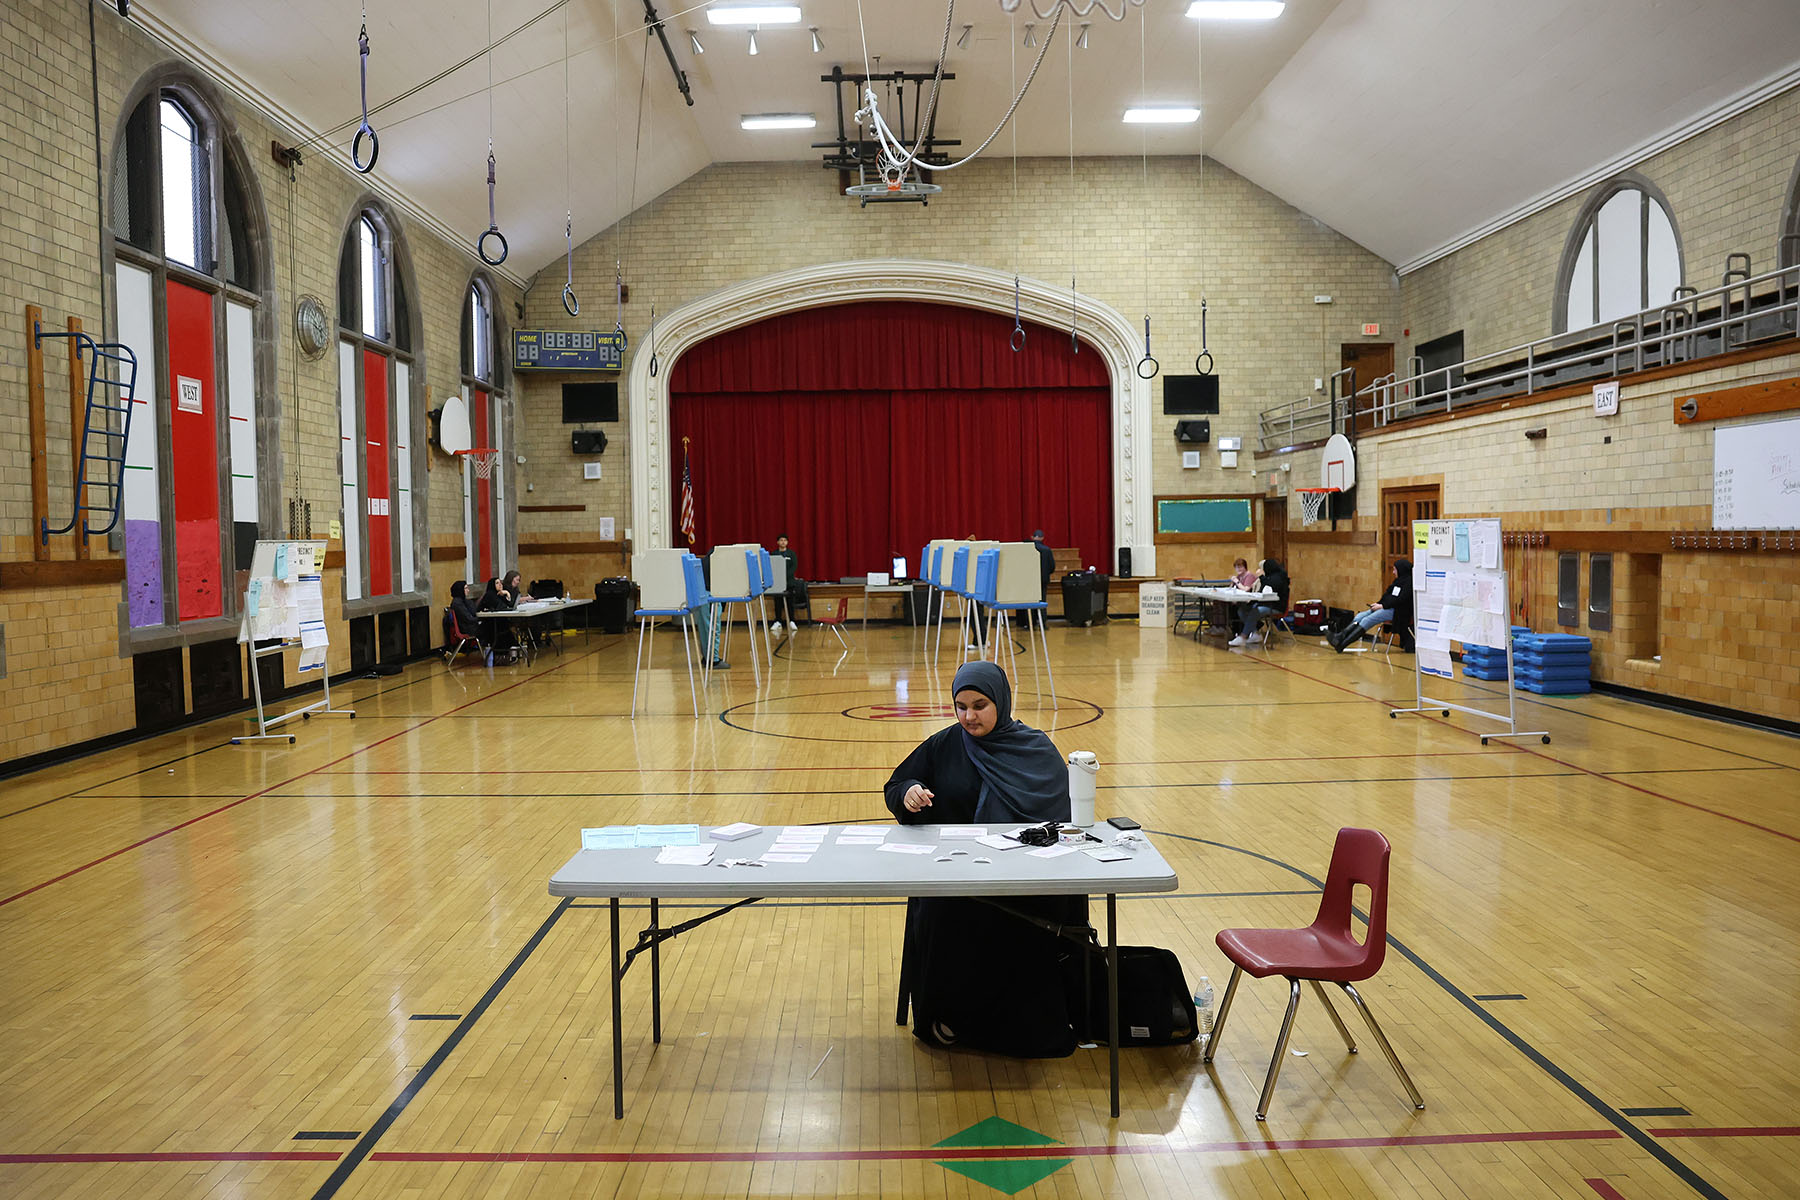 A poll worker wears a hijab as she sits at check-in table at Maples Elementary School.